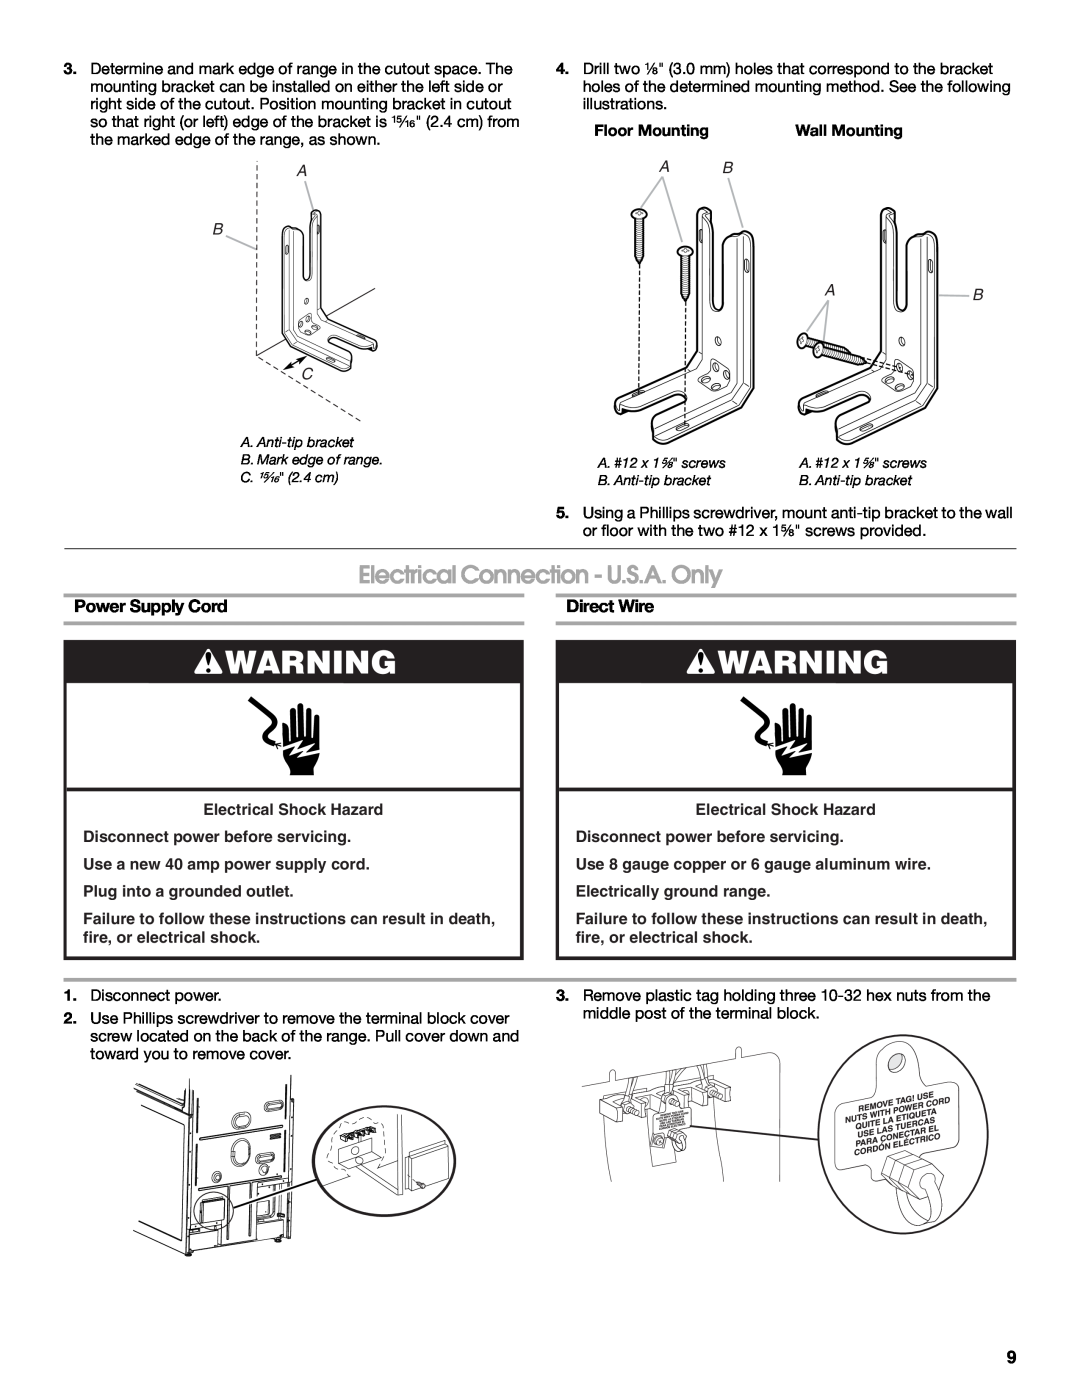 KitchenAid W10526086A Electrical Connection - U.S.A. Only, Power Supply Cord, Direct Wire, A B C, Floor Mounting, A B Ab 